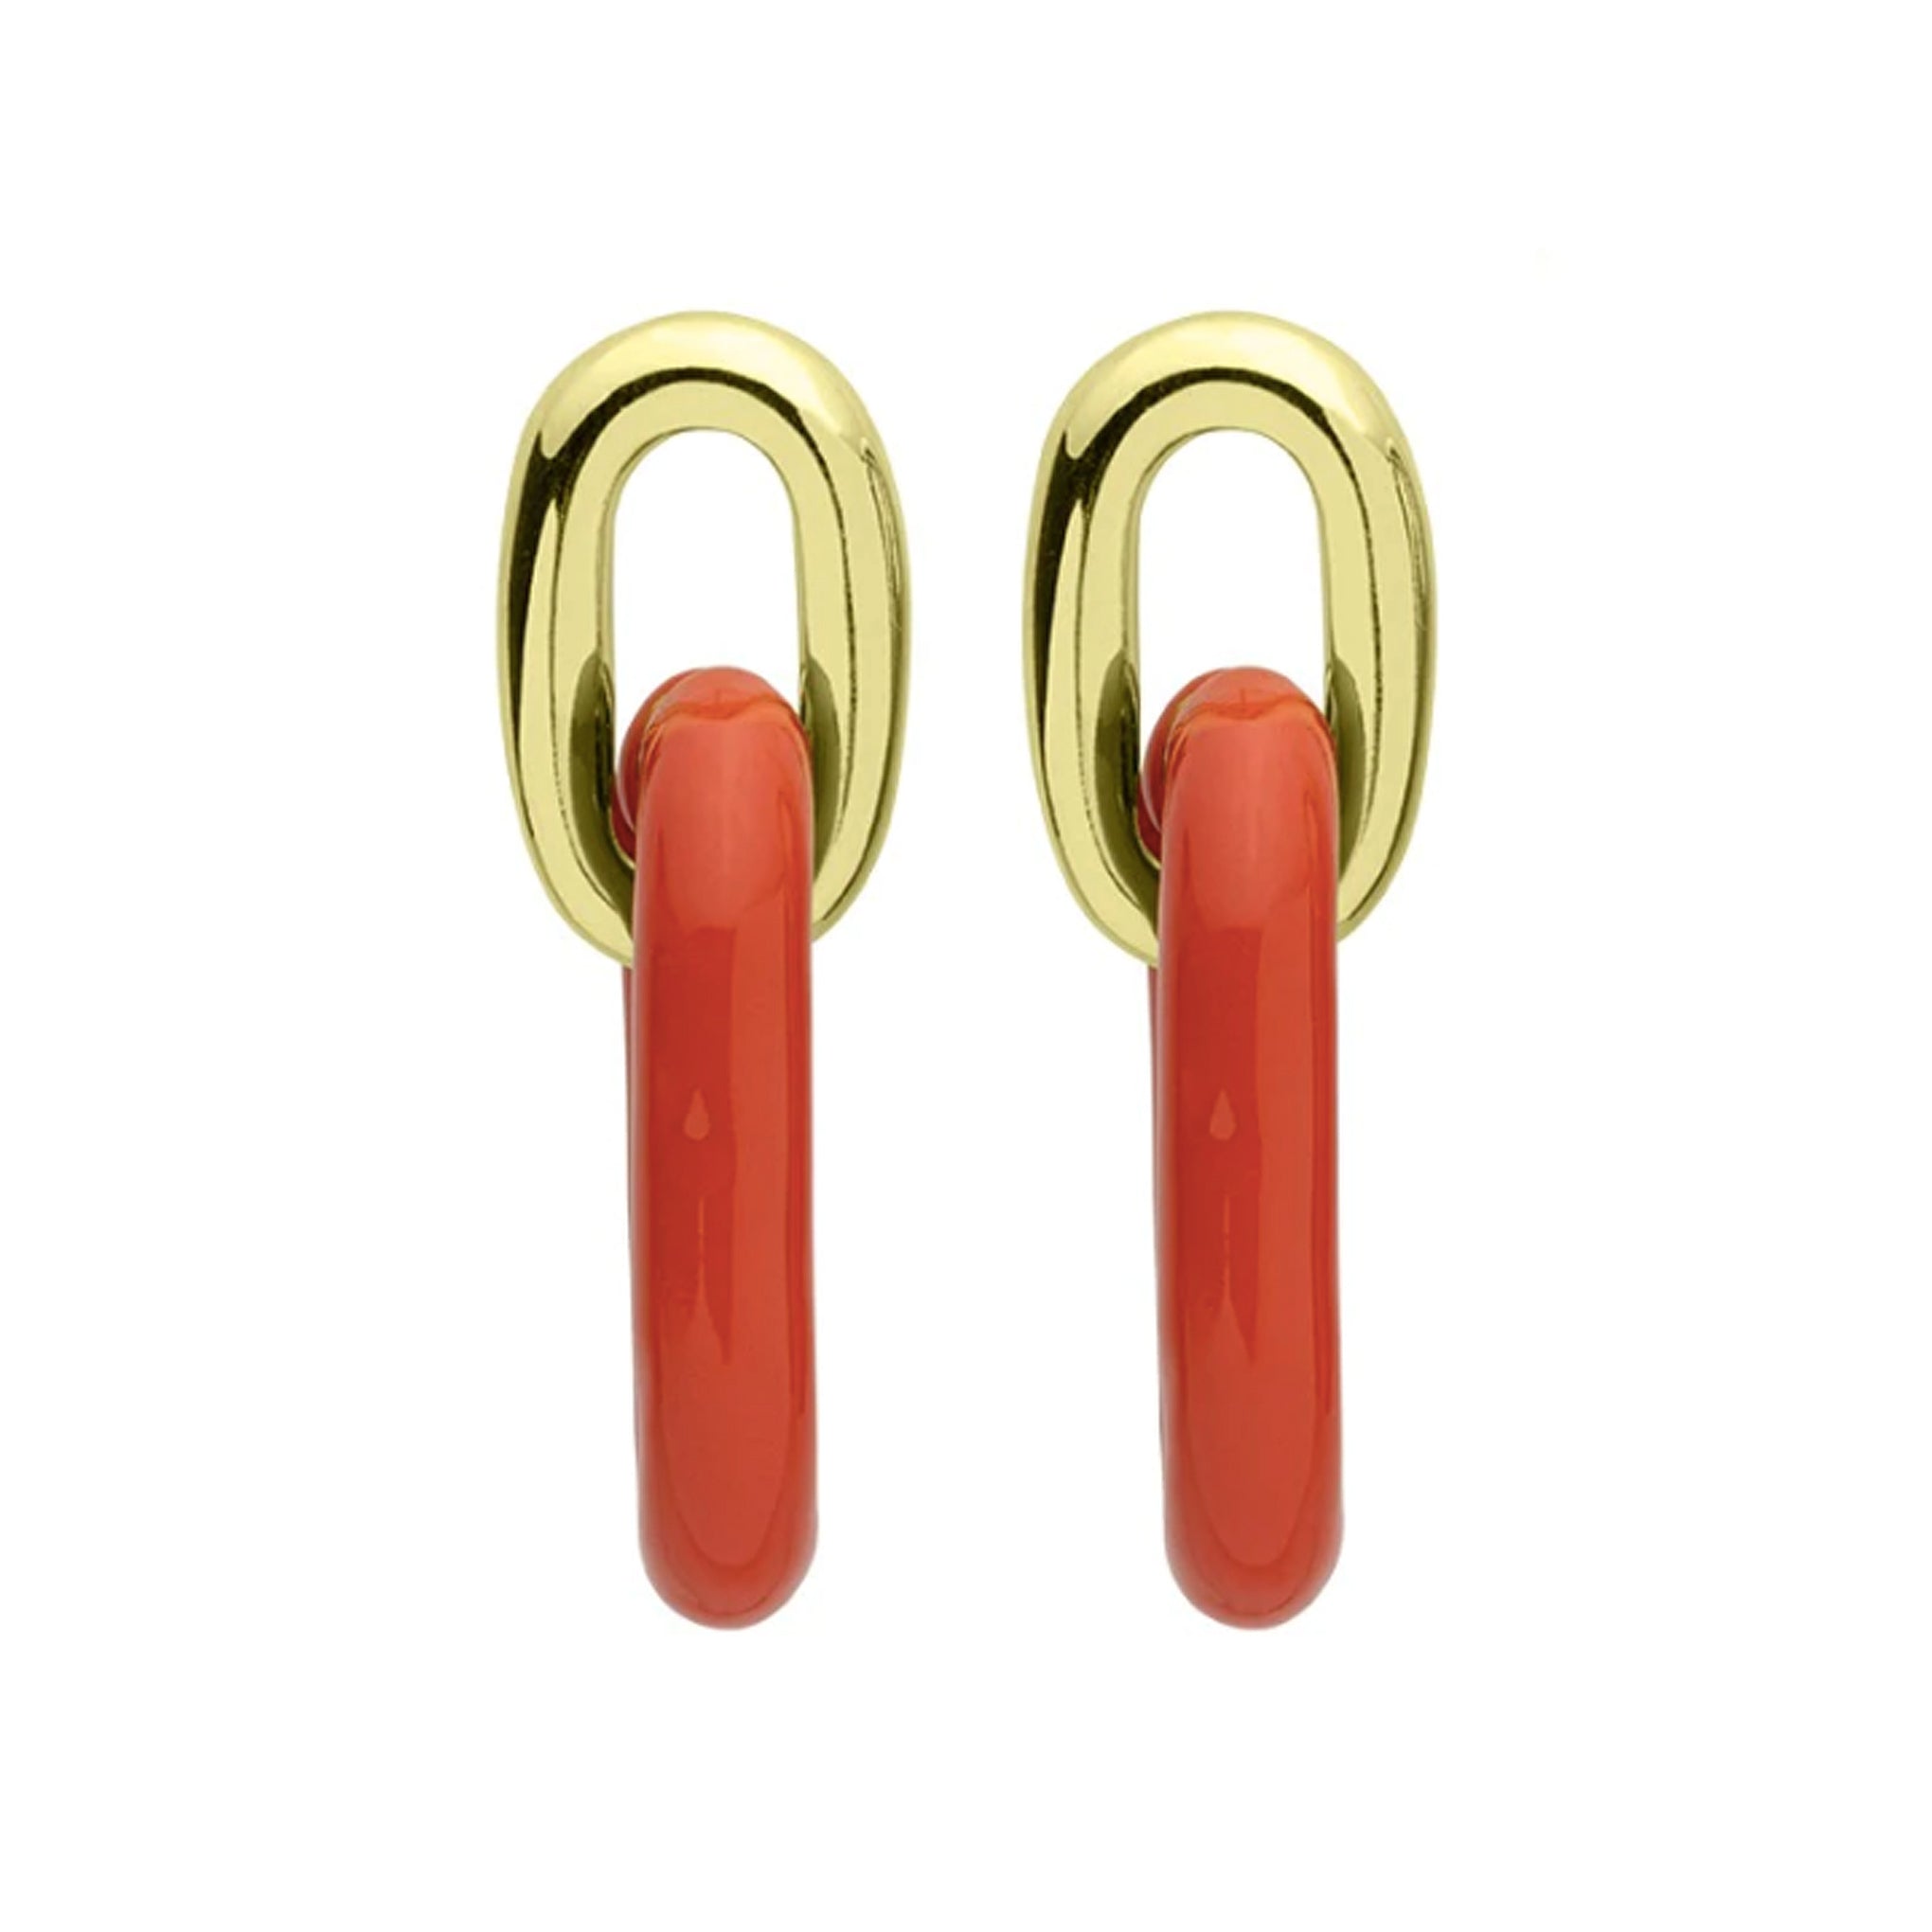 Sheila Fajl Small Shakedown Statement Earrings in Polished Gold and Orange